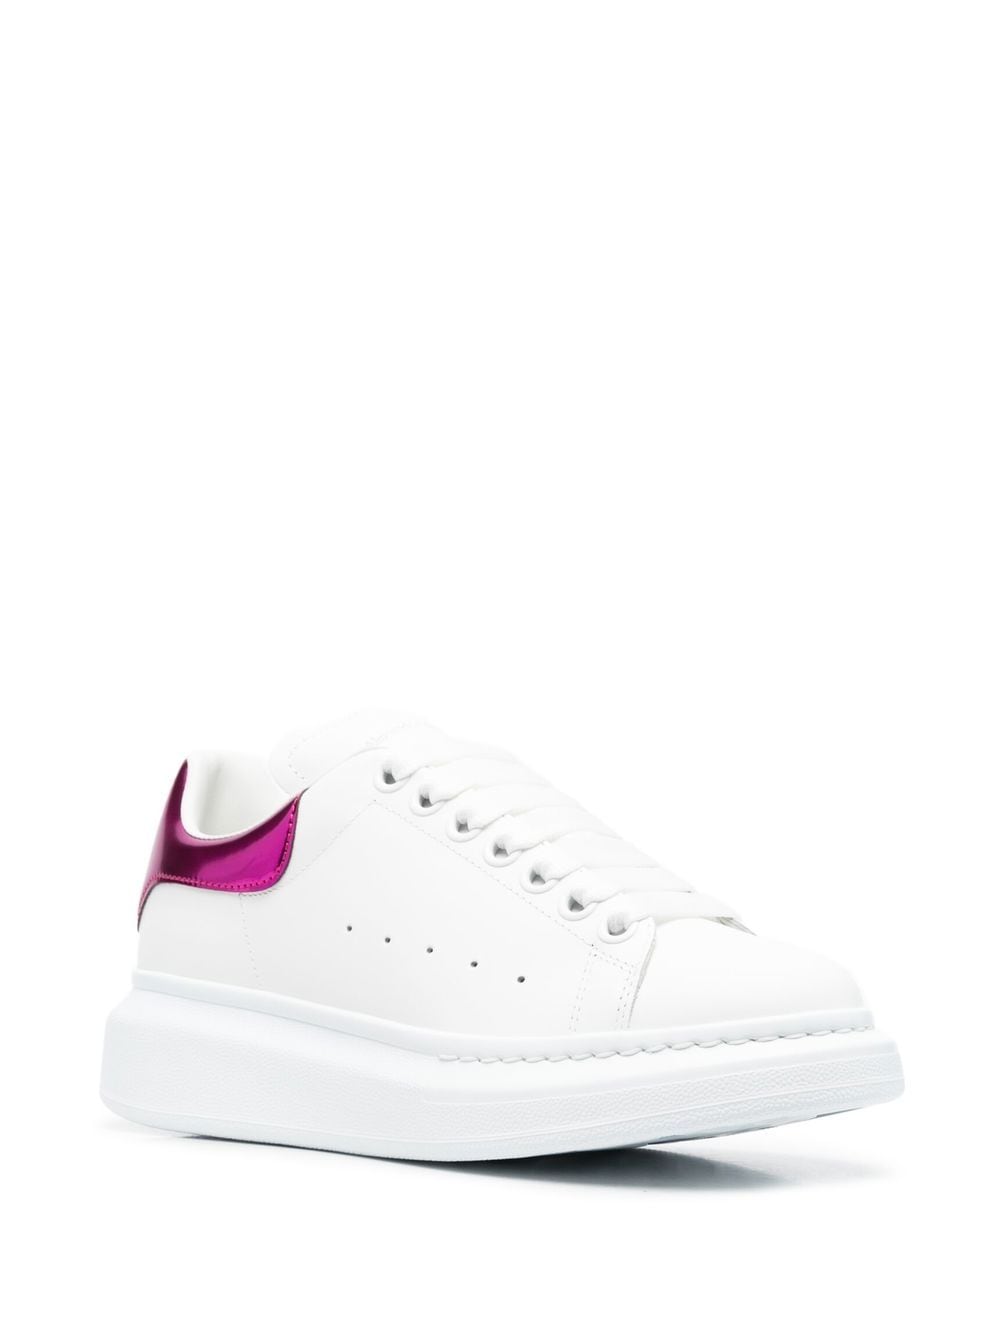 White/purple leather/suede oversized low-top sneakers